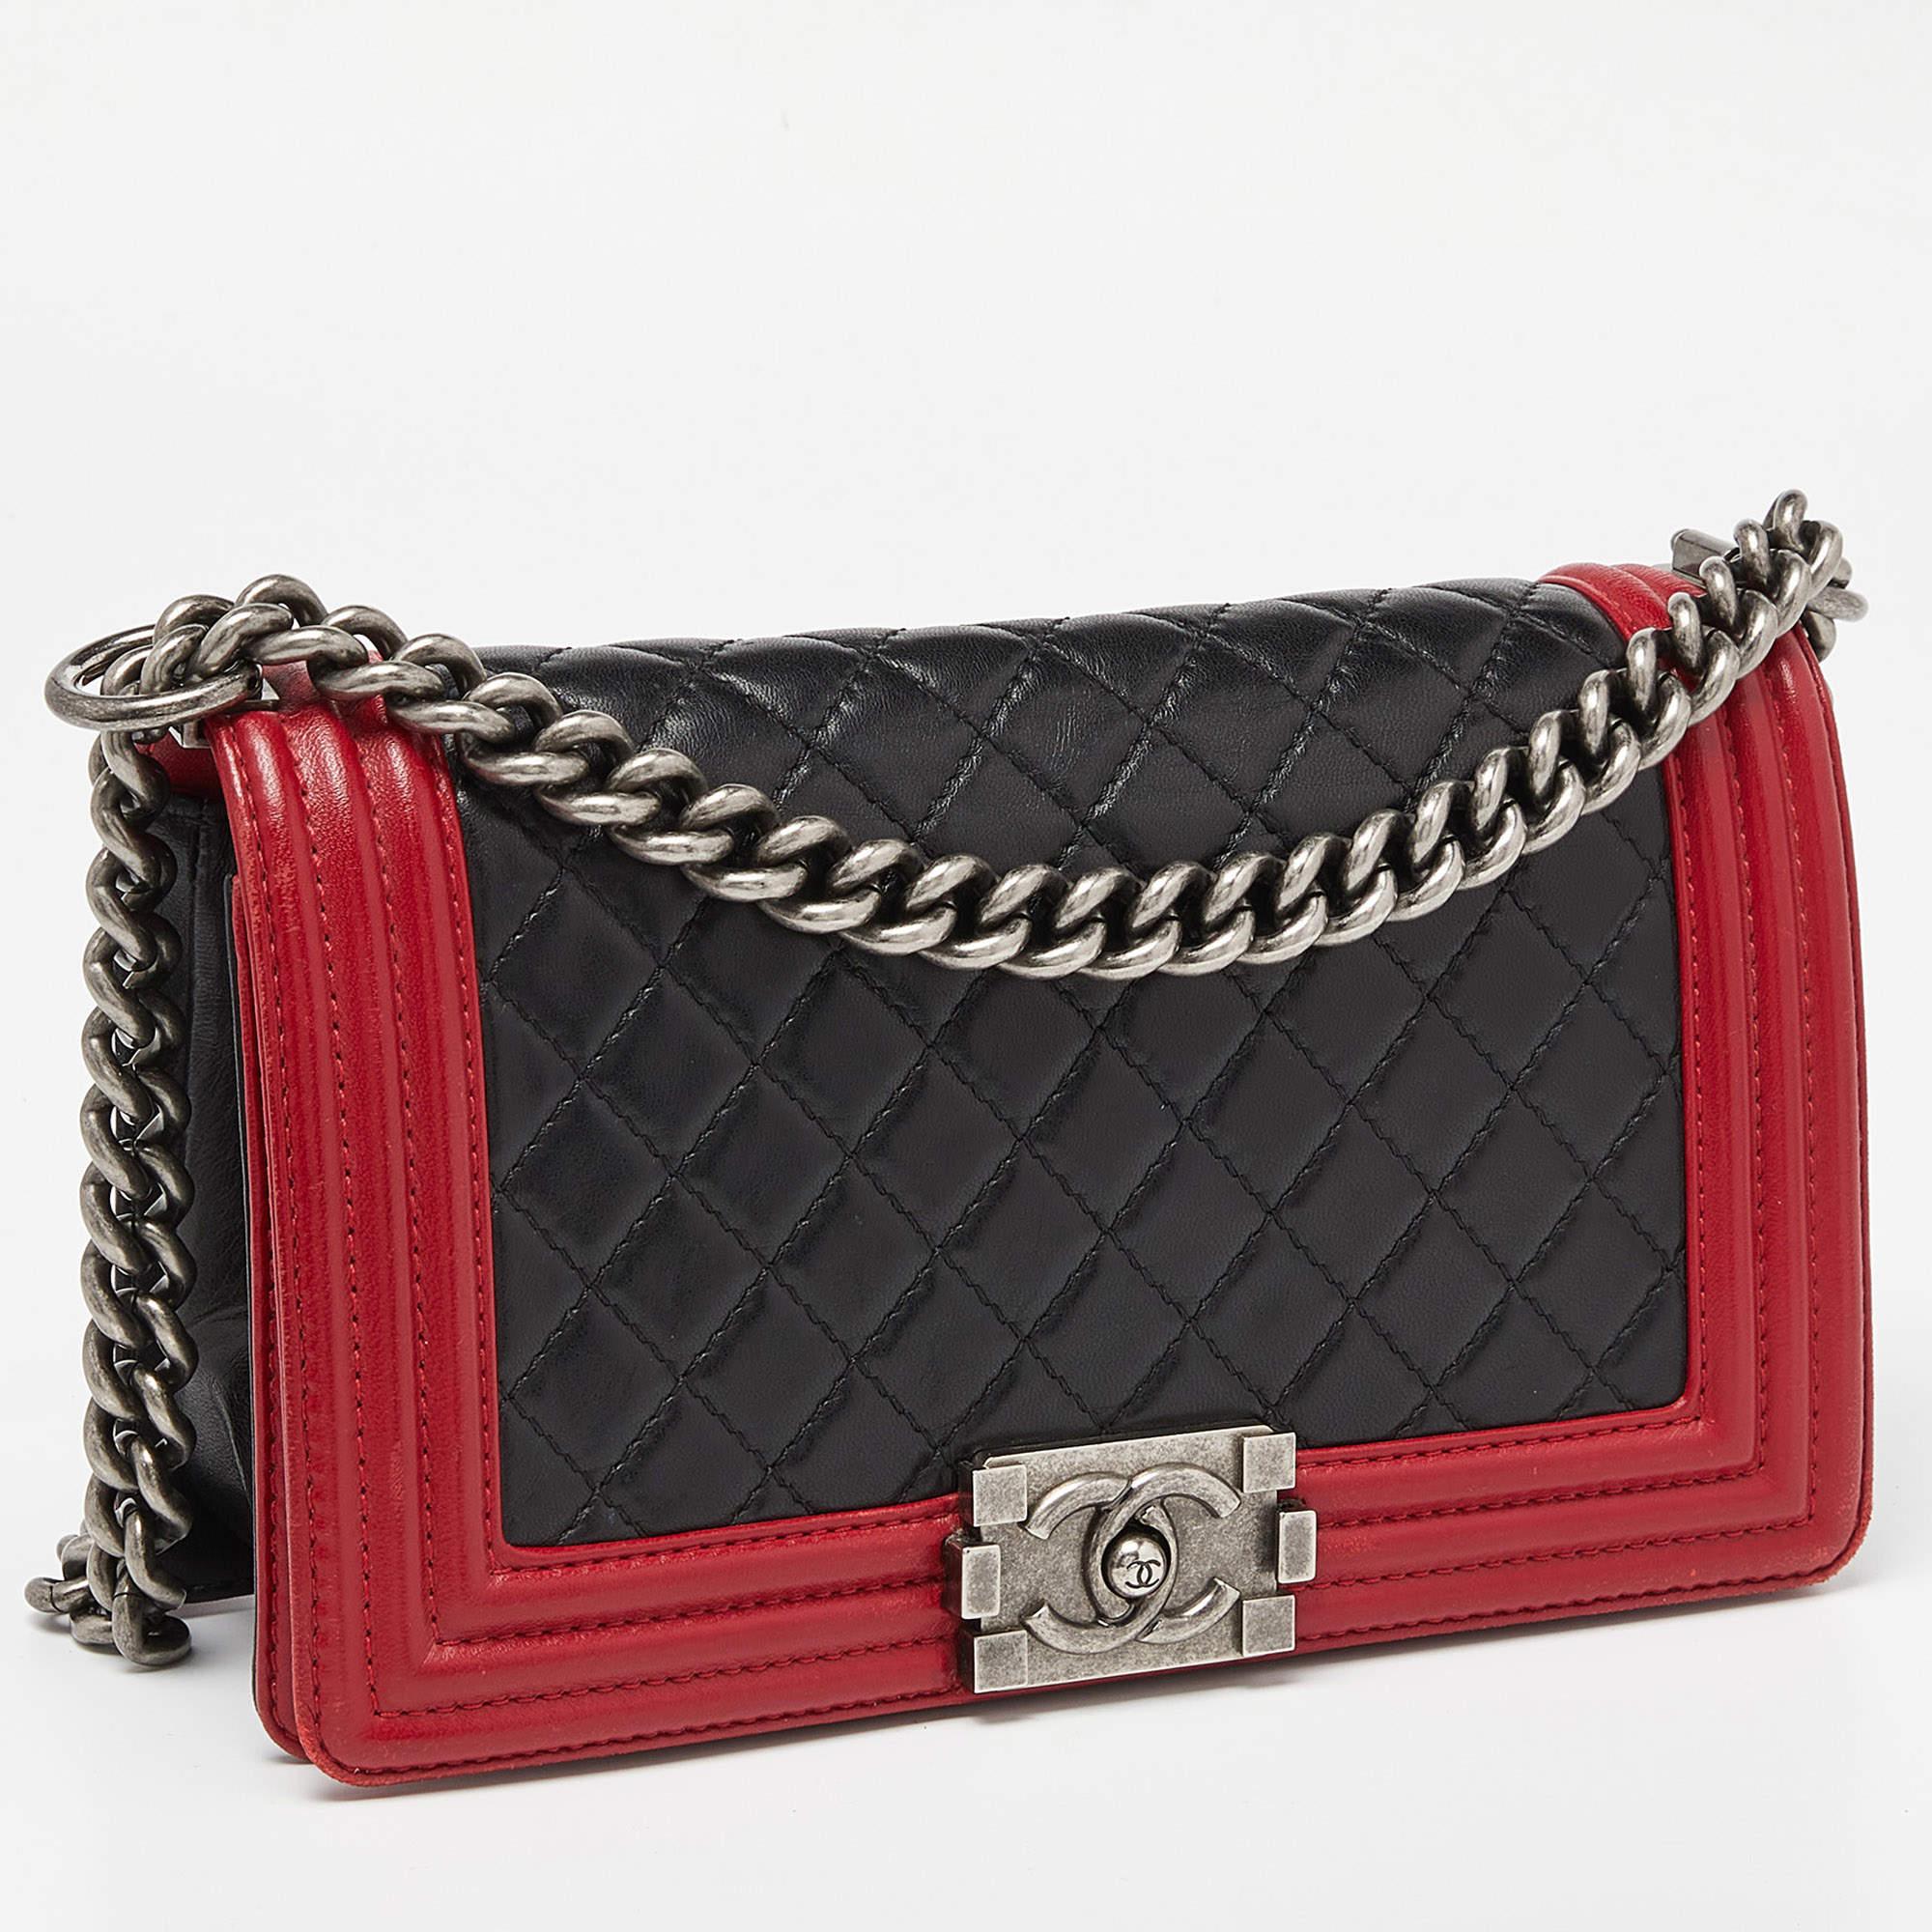 Women's Chanel Black/Red Quilted Leather Medium Boy Flap Bag For Sale